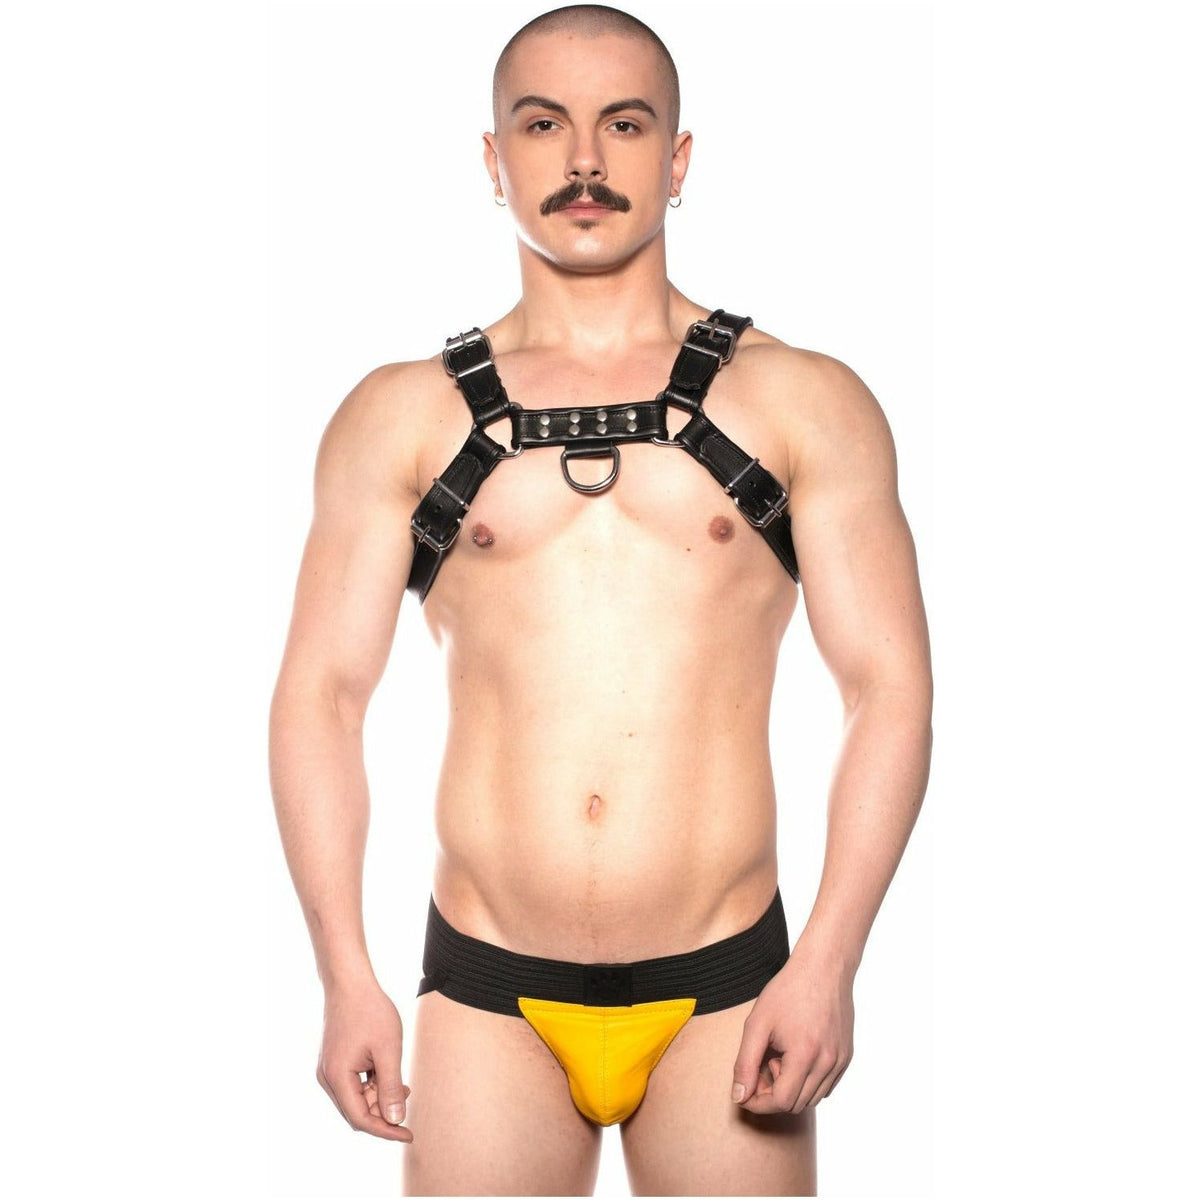 Prowler RED – Leather Bull Harness - Black - Large